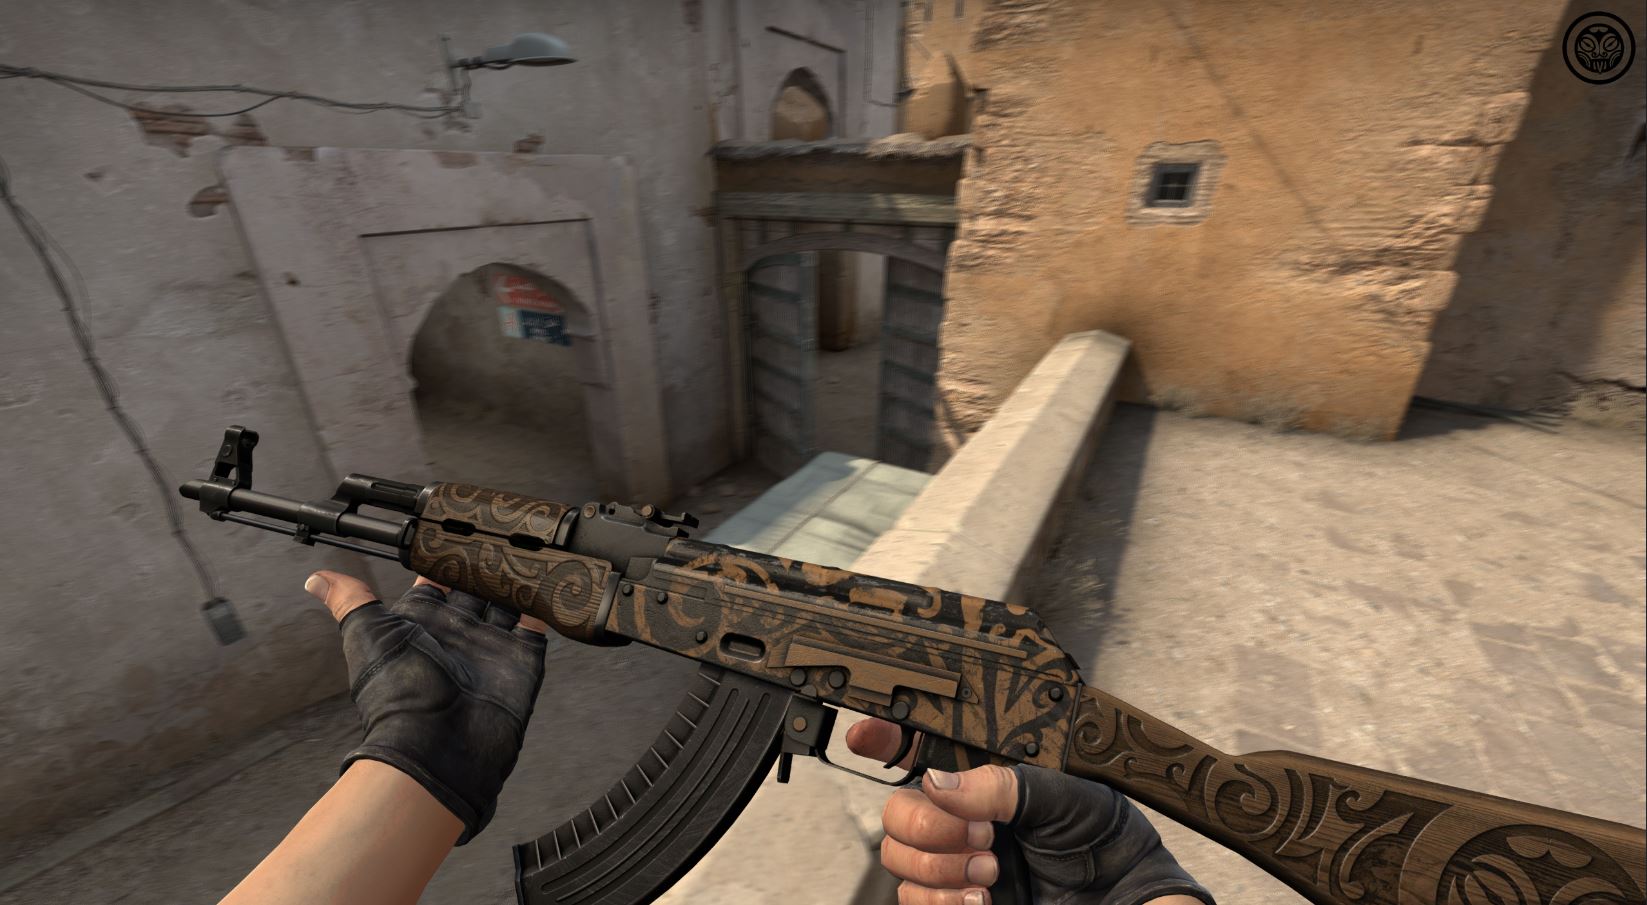 How to Dupe CSGO Skins - And Should You?